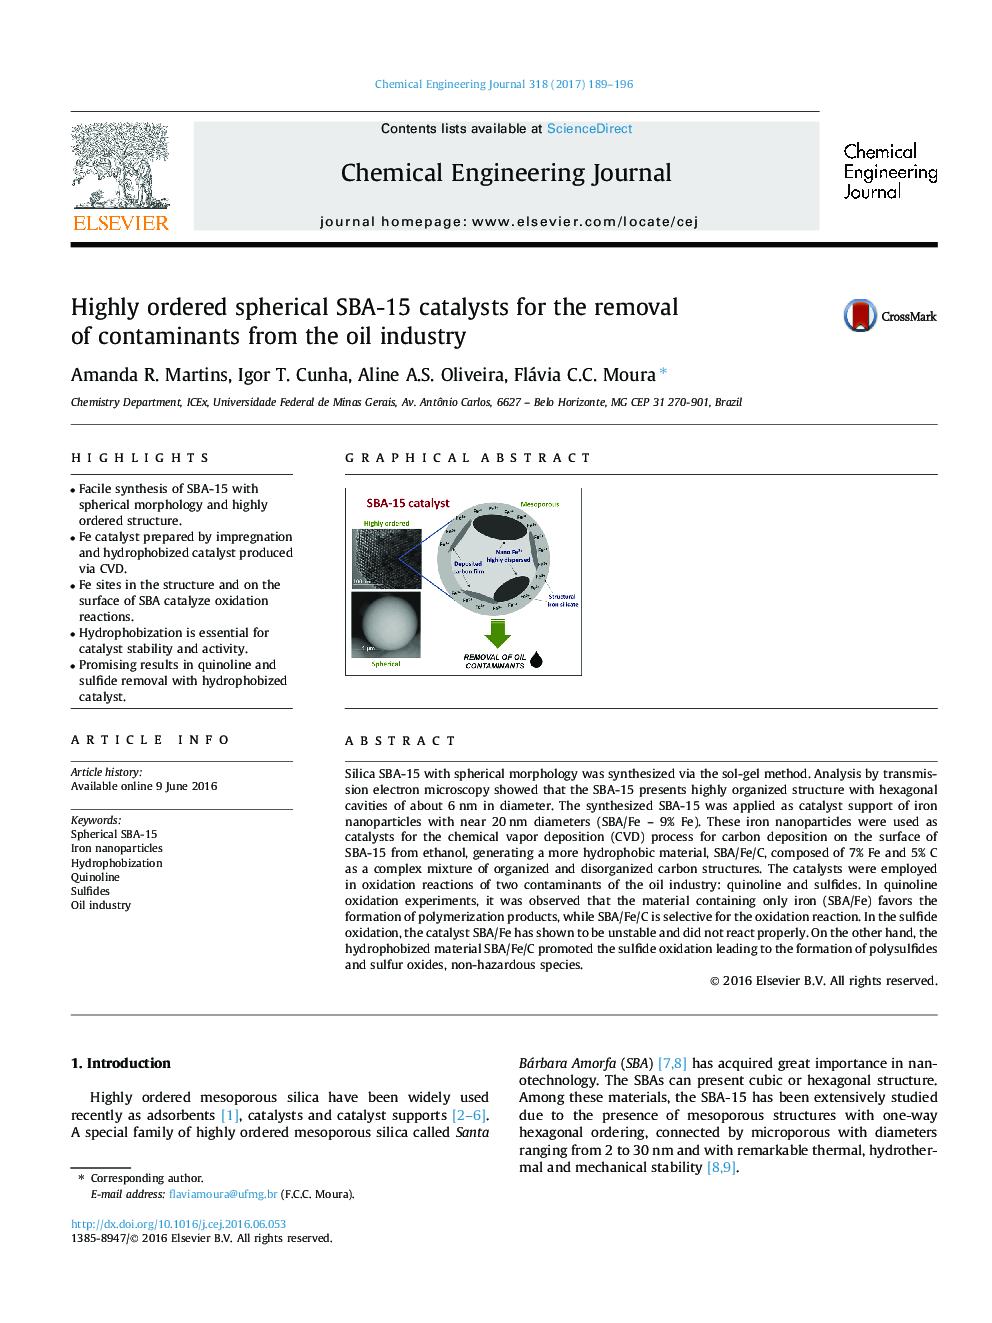 Highly ordered spherical SBA-15 catalysts for the removal of contaminants from the oil industry